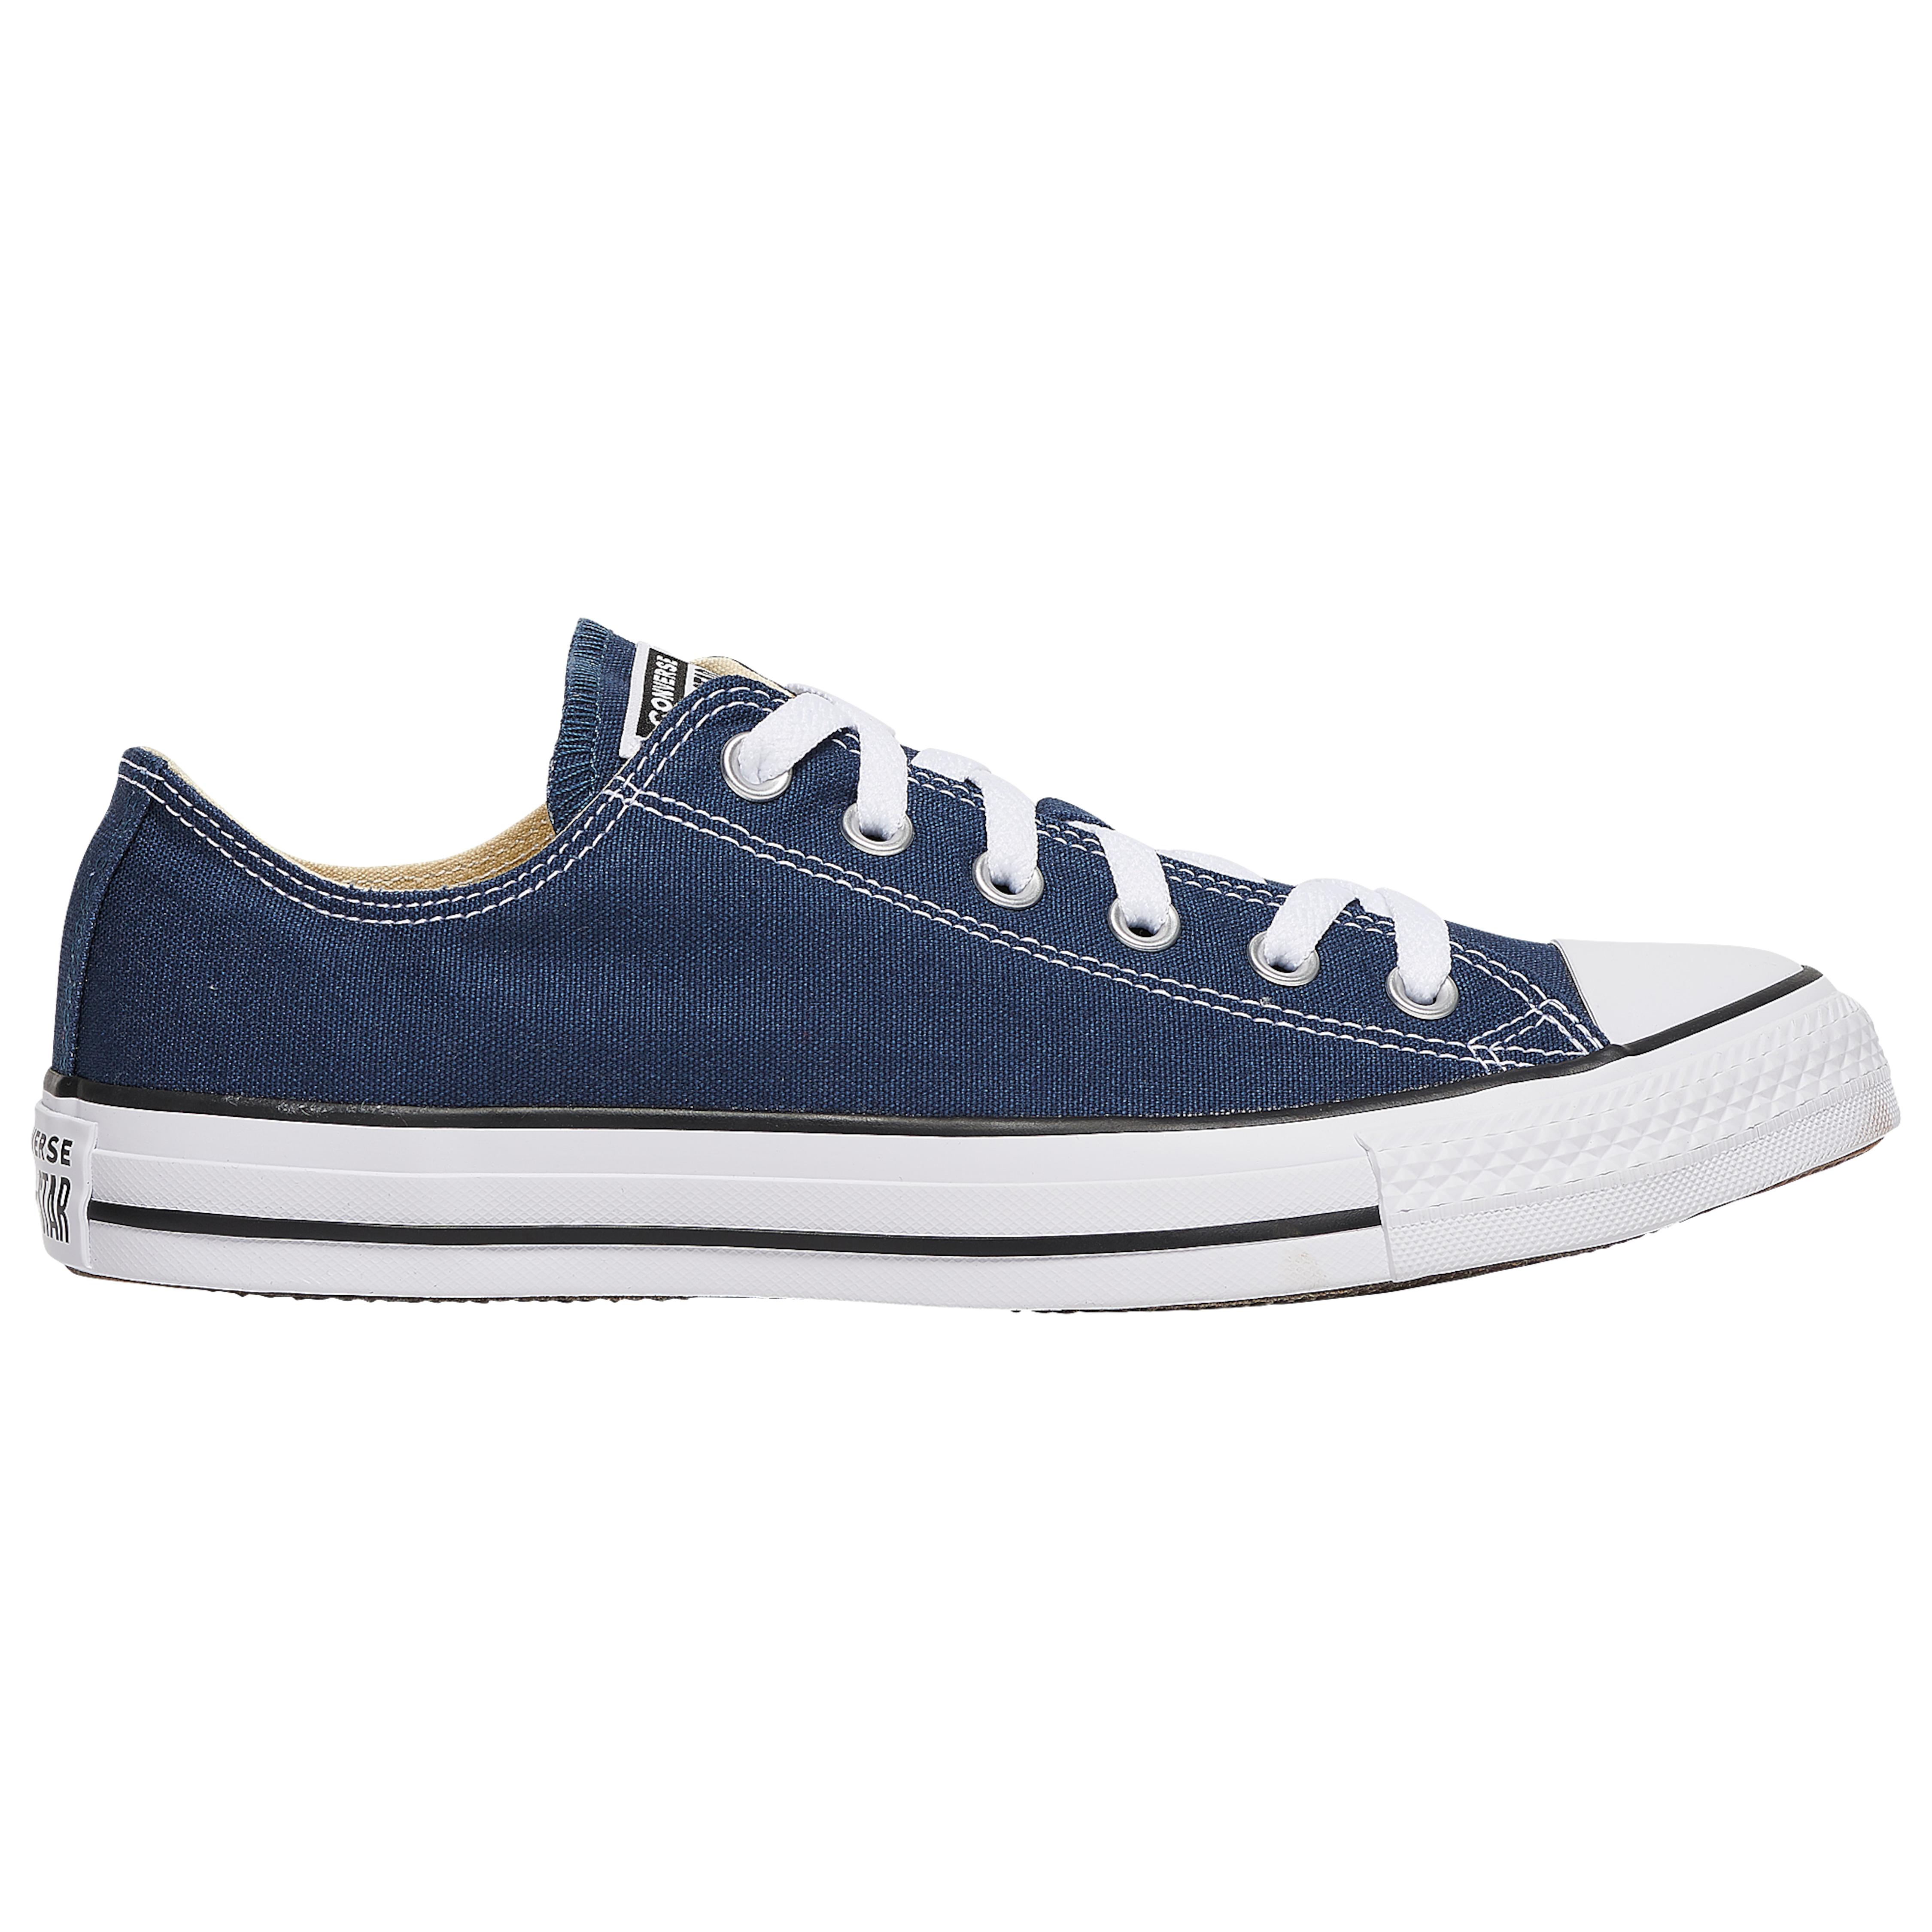 Converse Canvas All Star Ox Casual Basketball Shoes in Navy / White ...